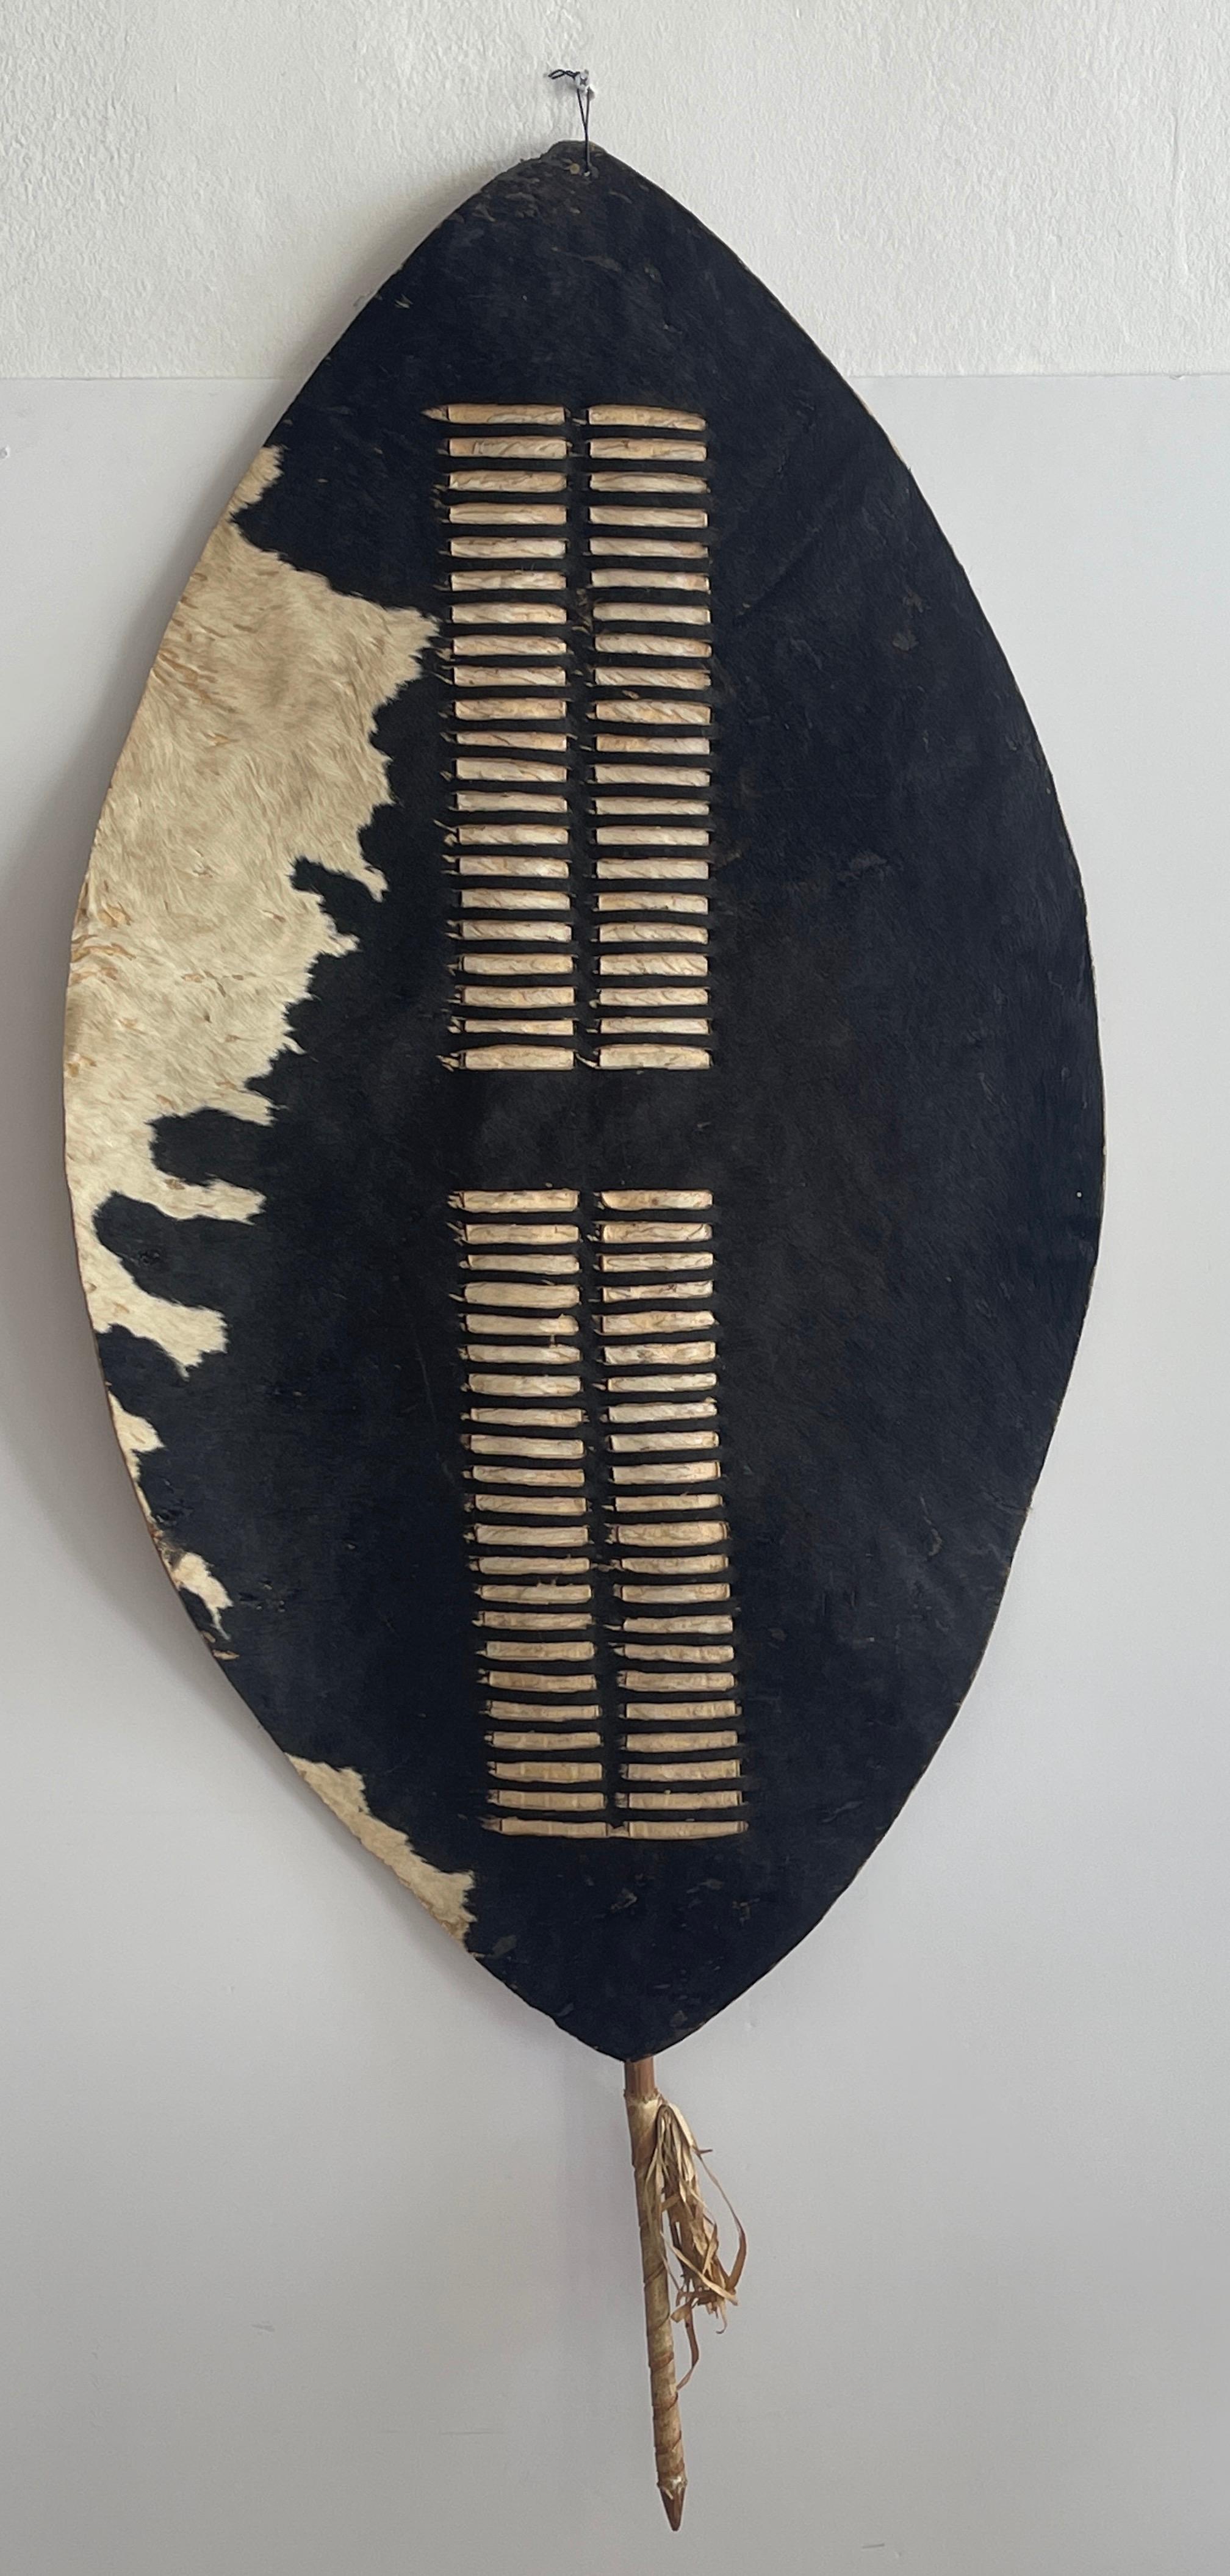 African Zulu cowhide shield, South Africa
Of oval form the cow hide shield with front with interwoven hairy strips, complete with pole at the back in form of a spear, with extending handle. 
Overall measurements 54” high x 23